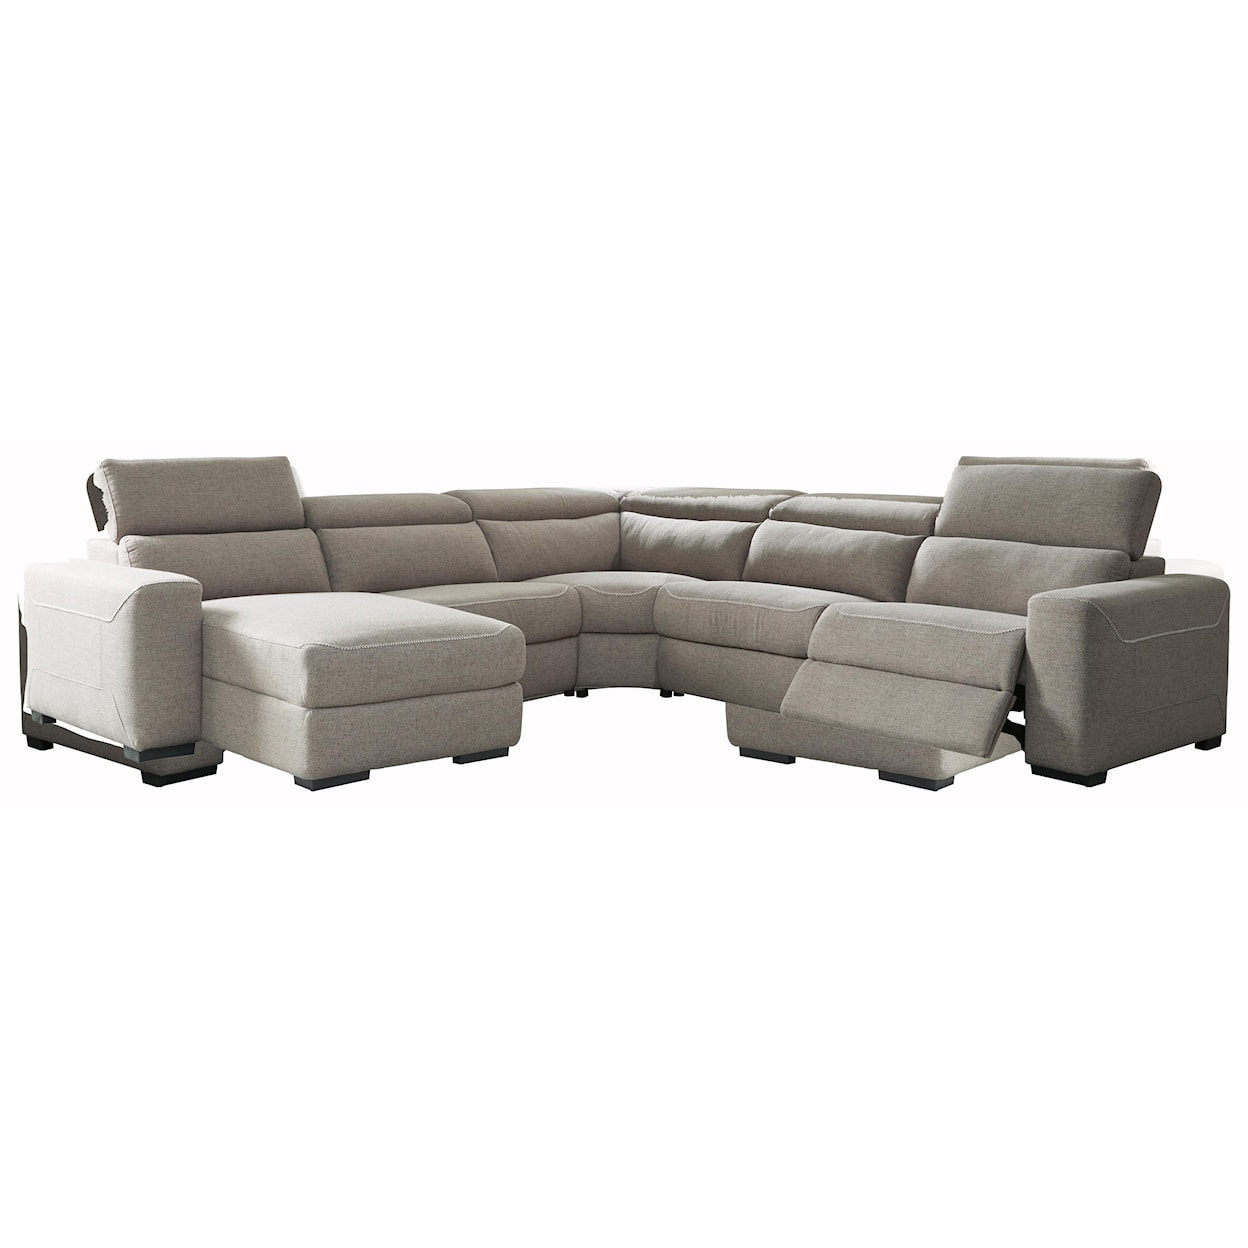 Signature Design by Ashley Mabton 5 Piece Power Reclining Sectional Sofa